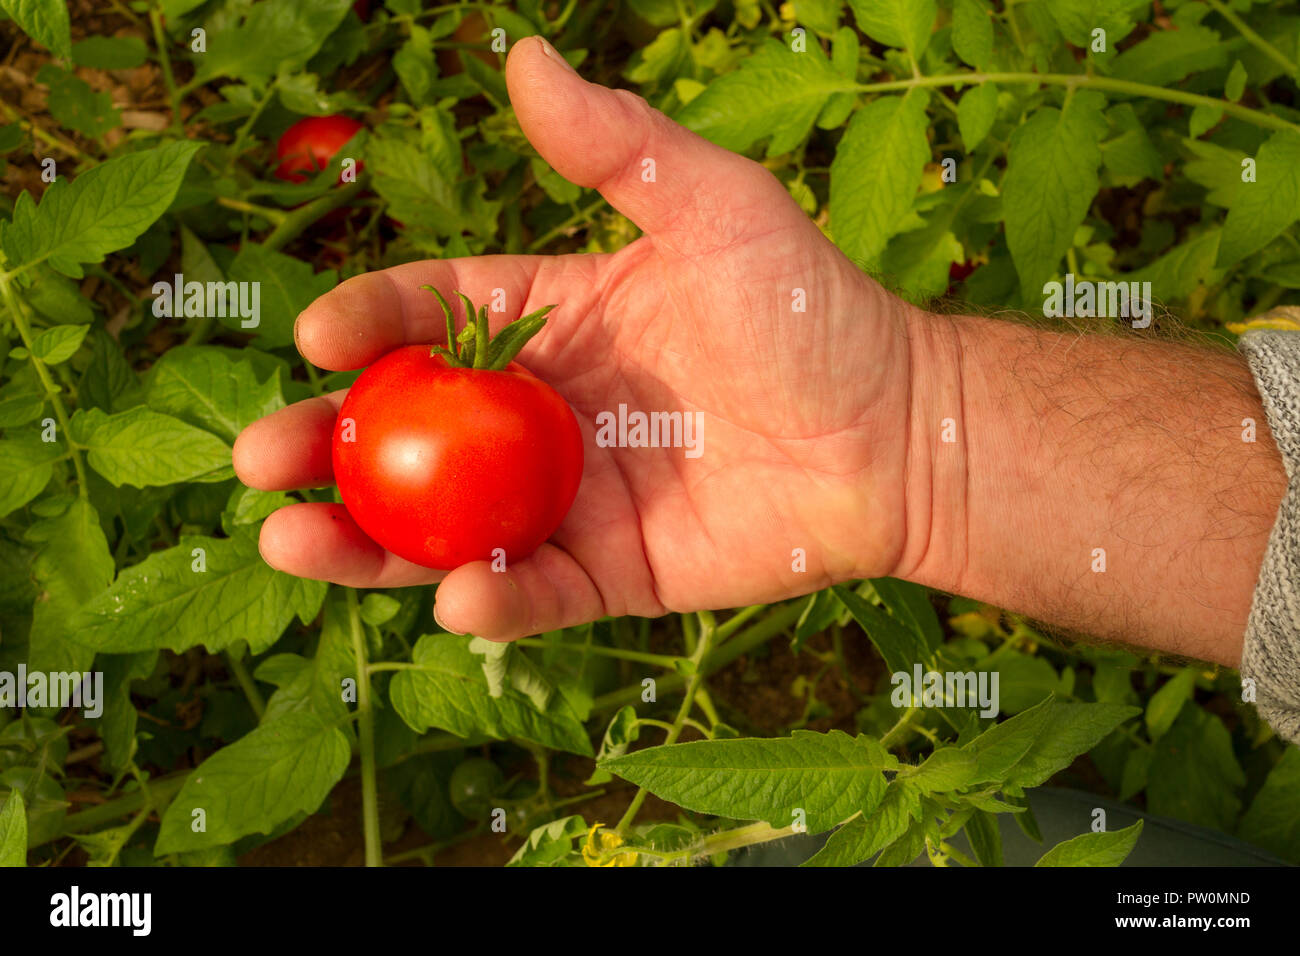 A hand holding a recently picked homegrown tomato against a backdrop of tomato plants Stock Photo